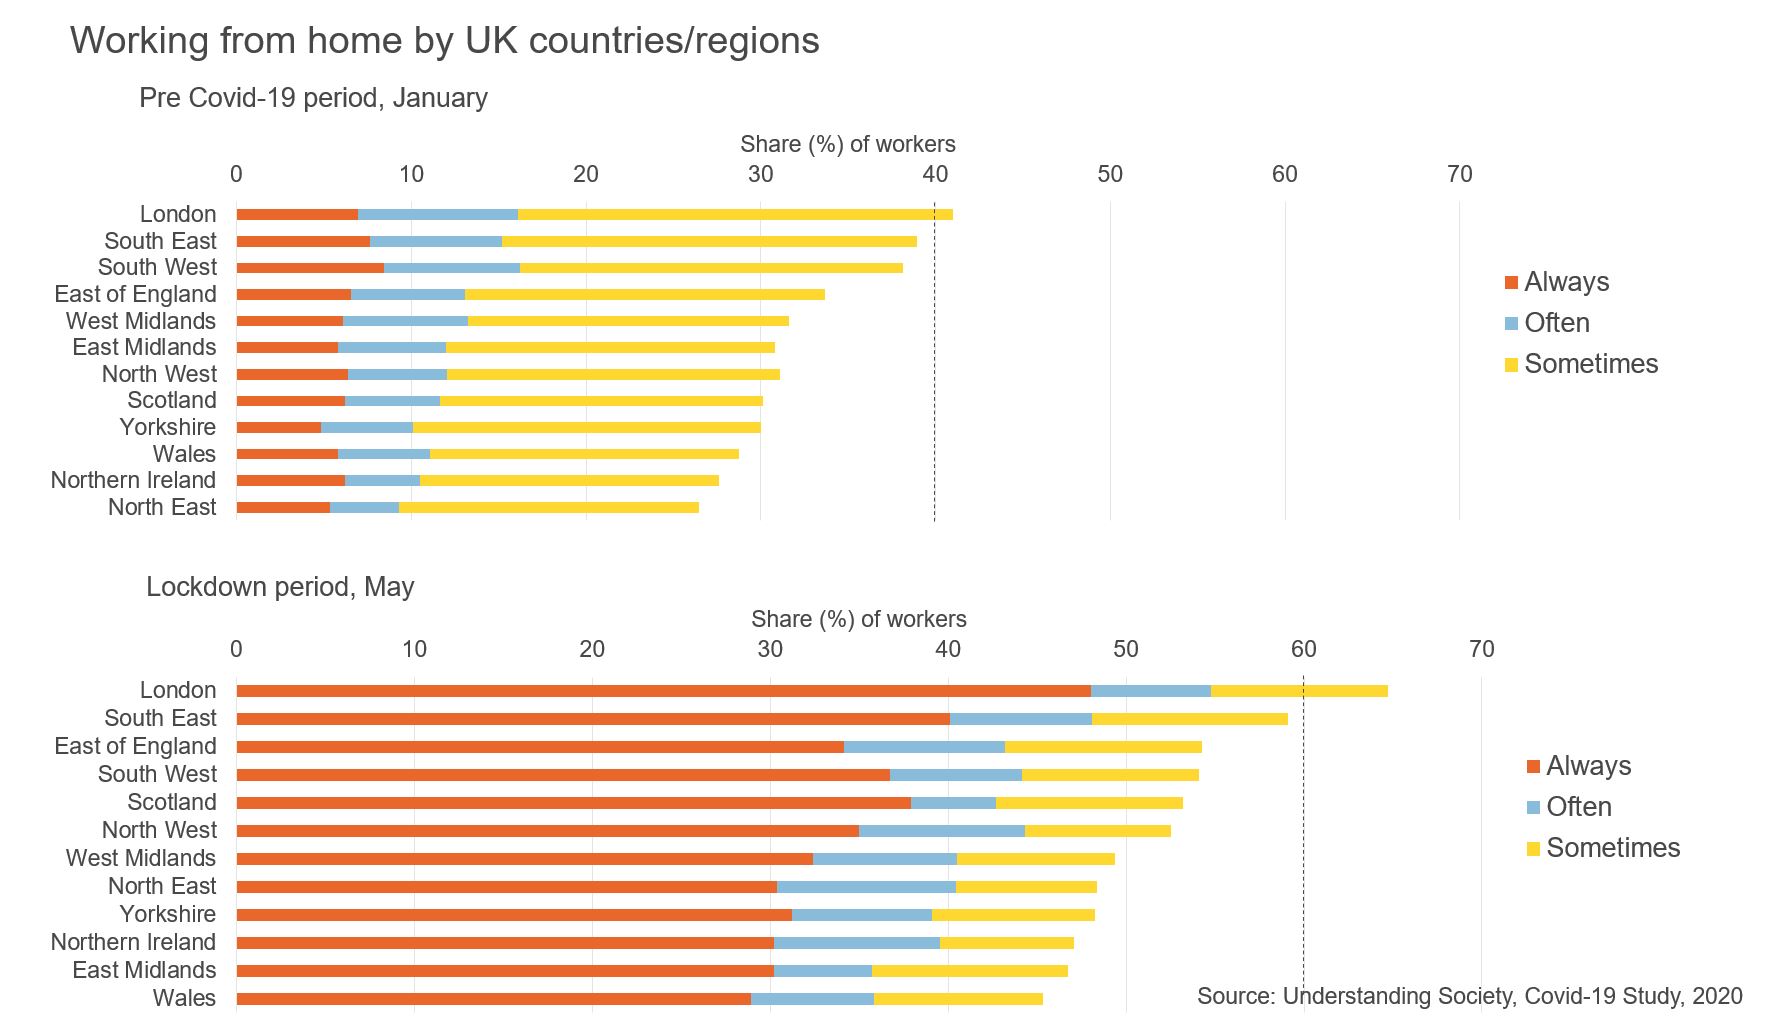 Figure showing working from home by UK countries/regions